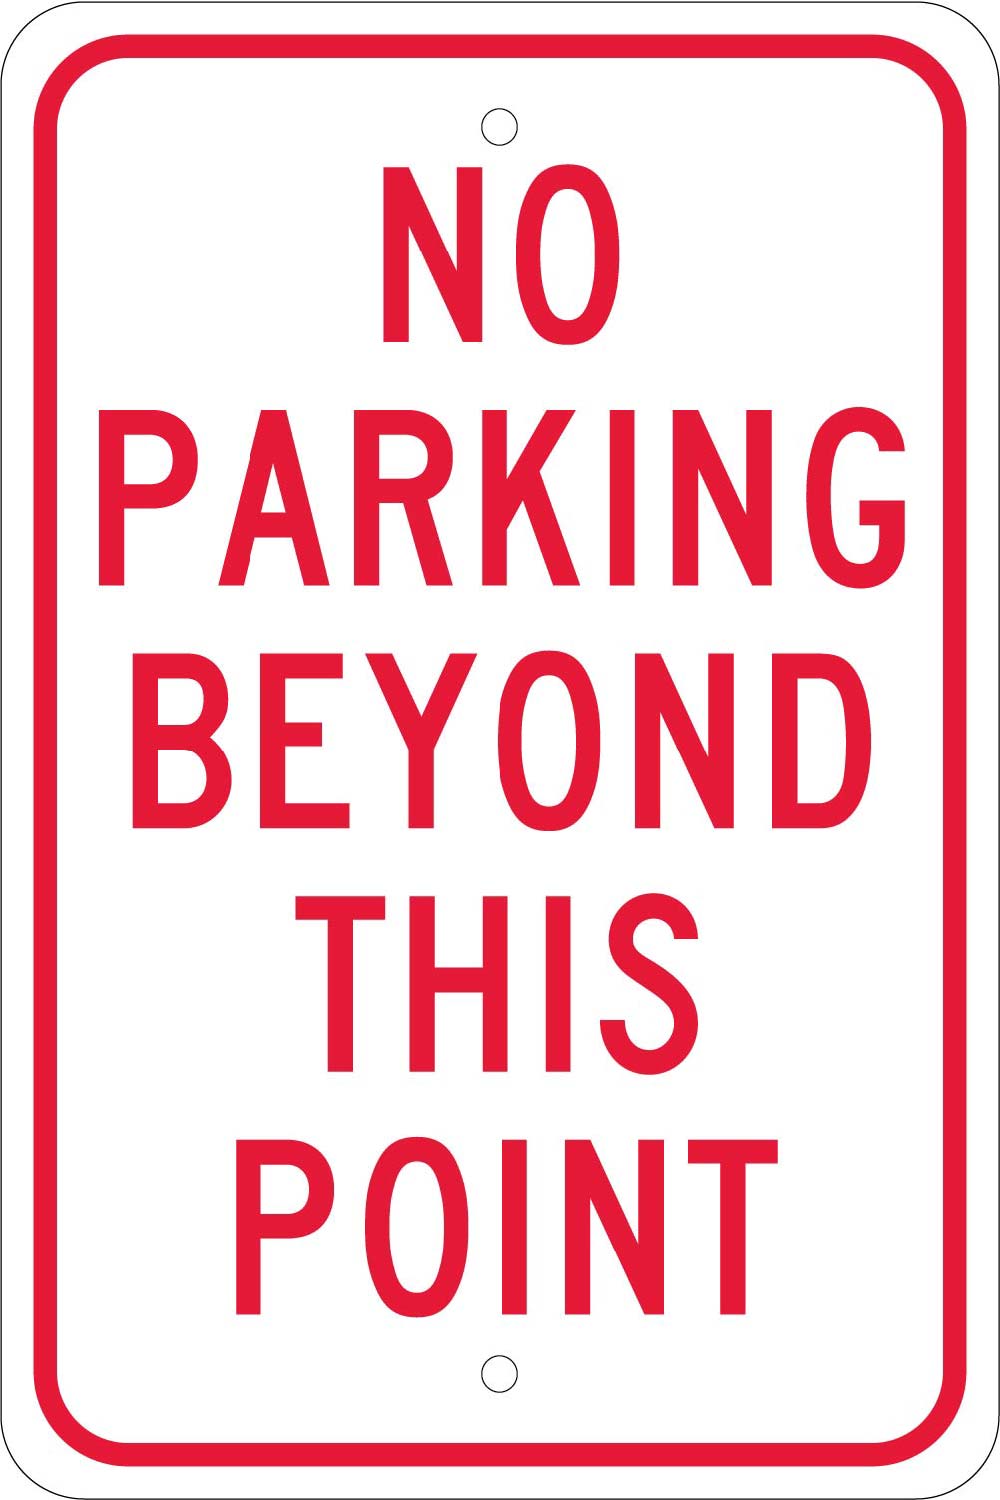 No Parking Beyond This Point Sign-eSafety Supplies, Inc